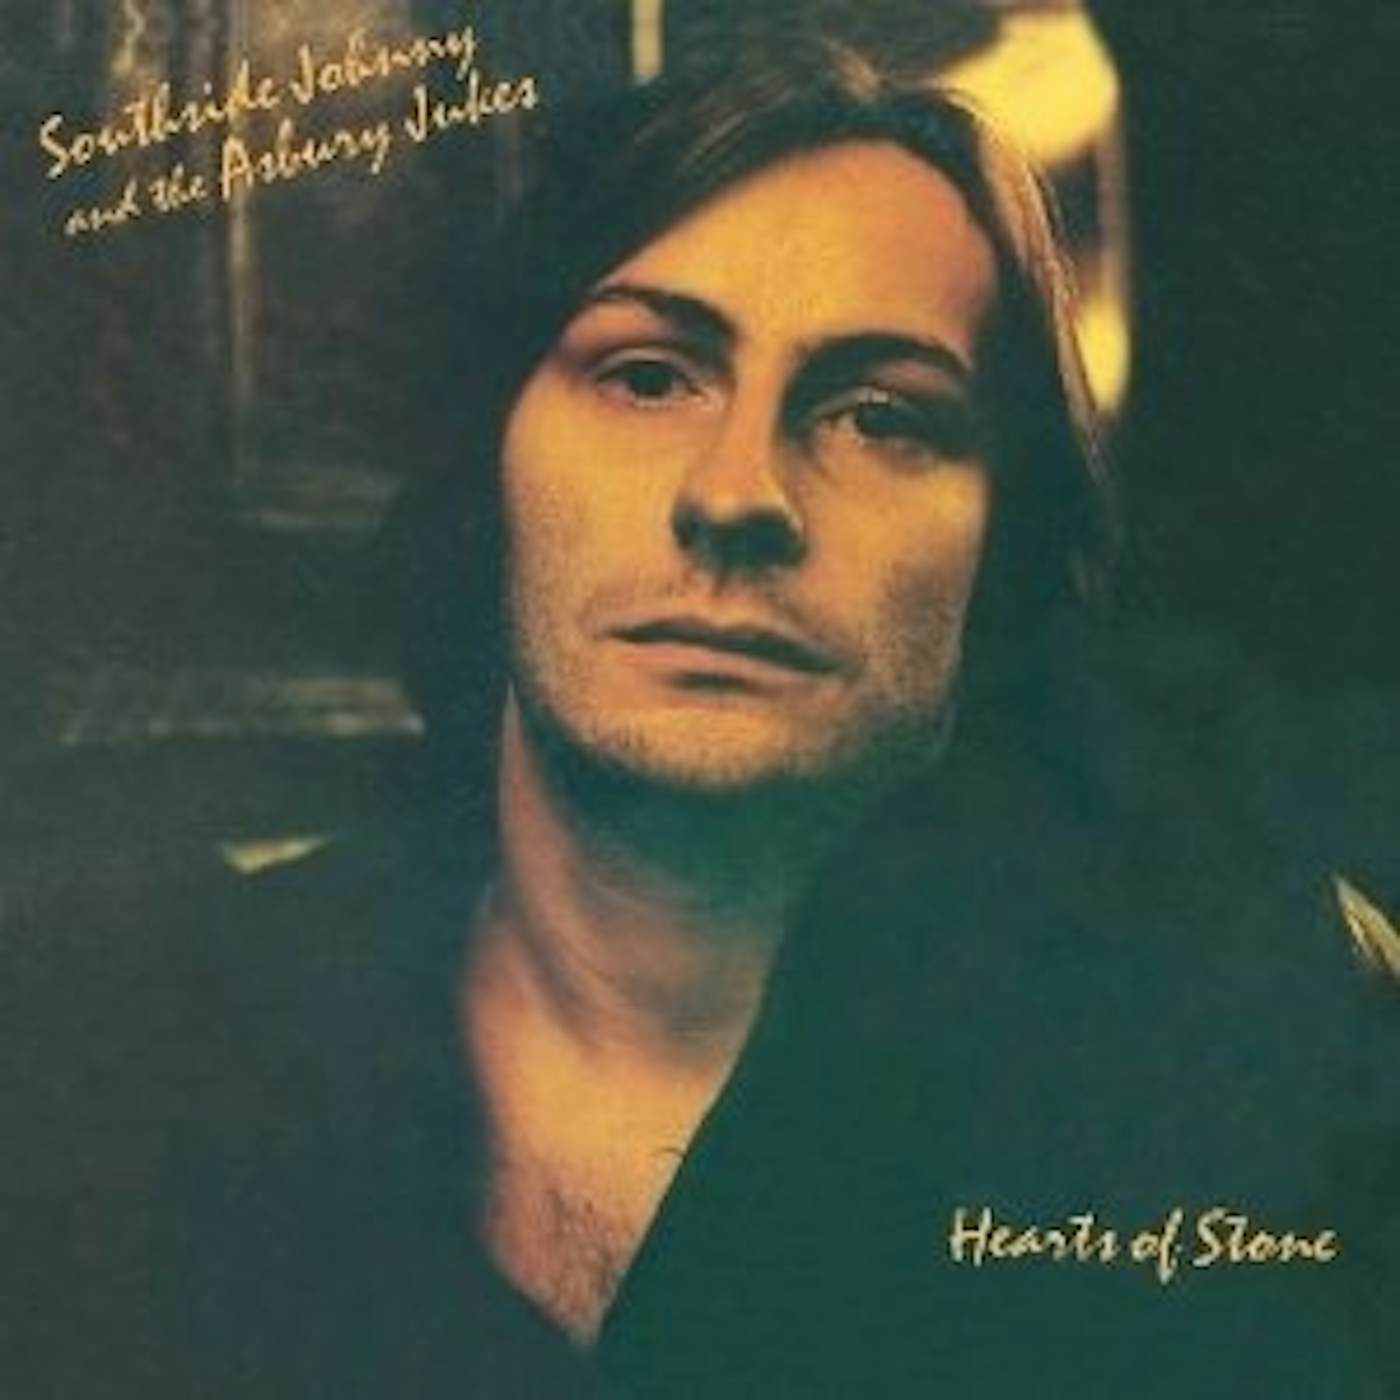 Southside Johnny And The Asbury Jukes HEARTS OF STONE Vinyl Record - 180 Gram Pressing